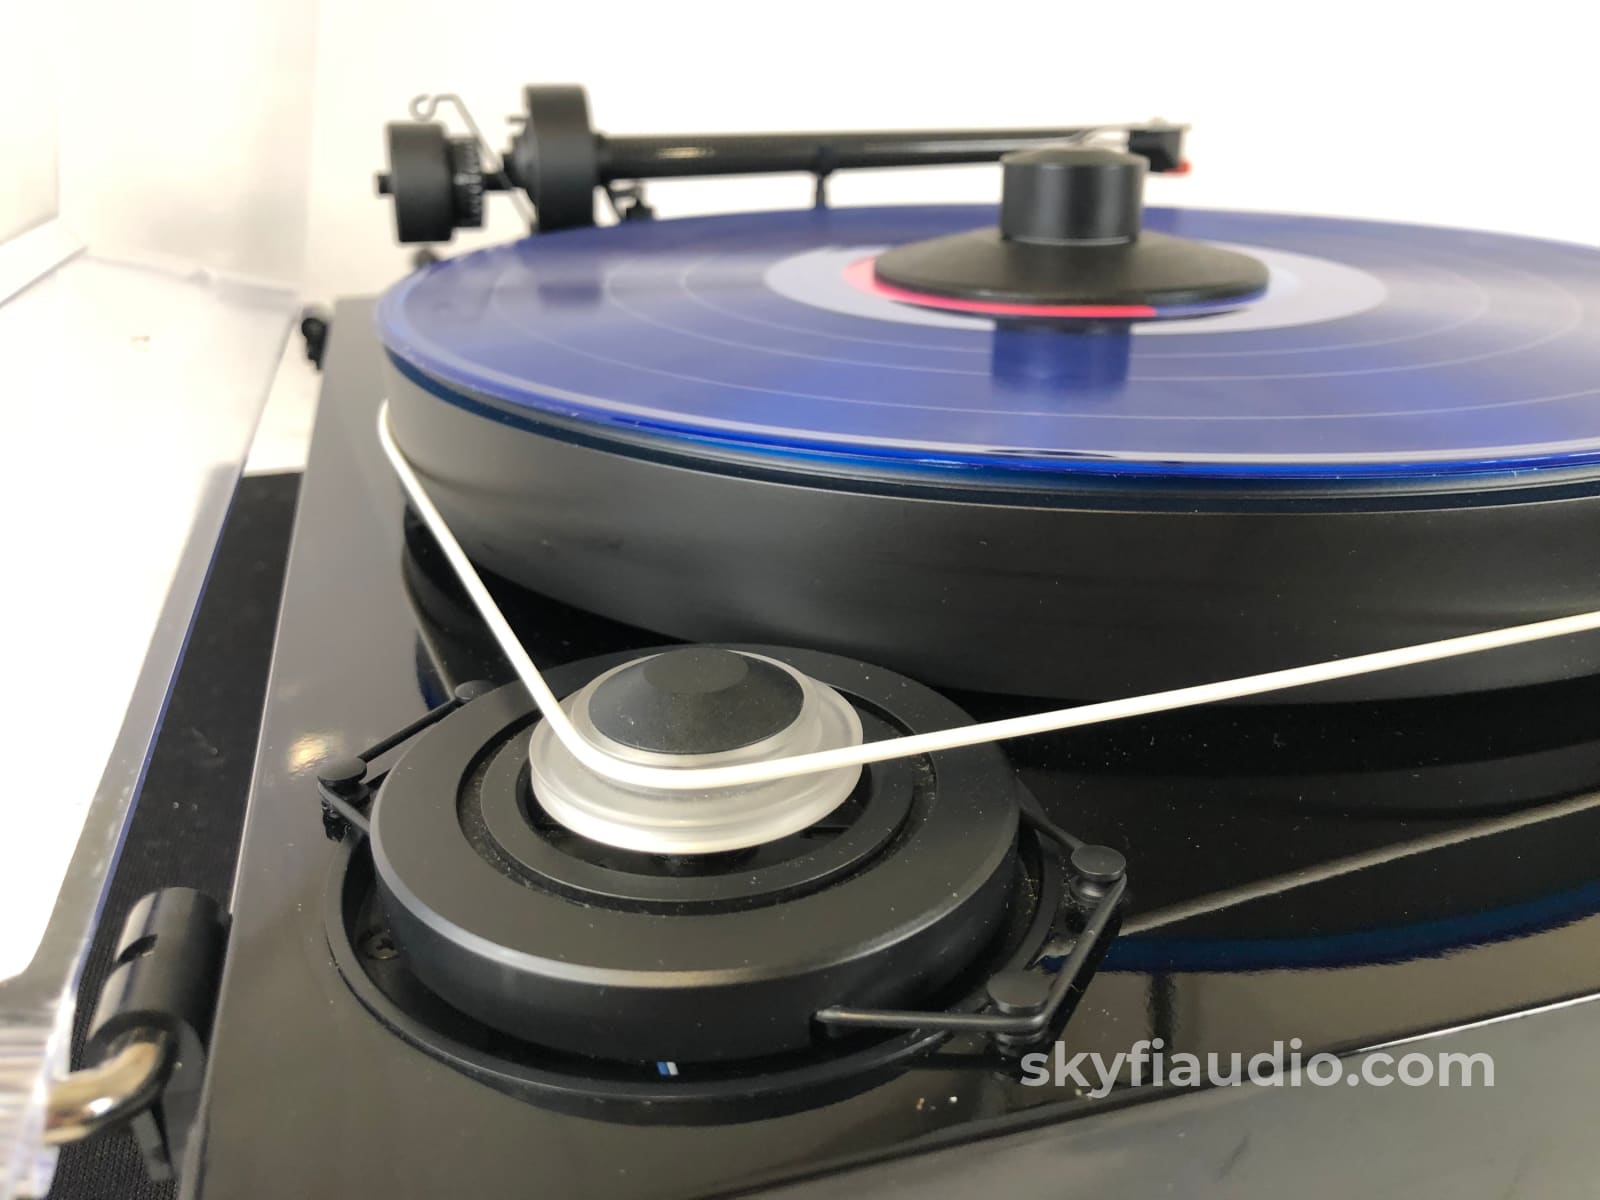 Pro-Ject 2 Xperience Turntable W/New Sumiko Cartridge And Carbon Cc9 Tonearm